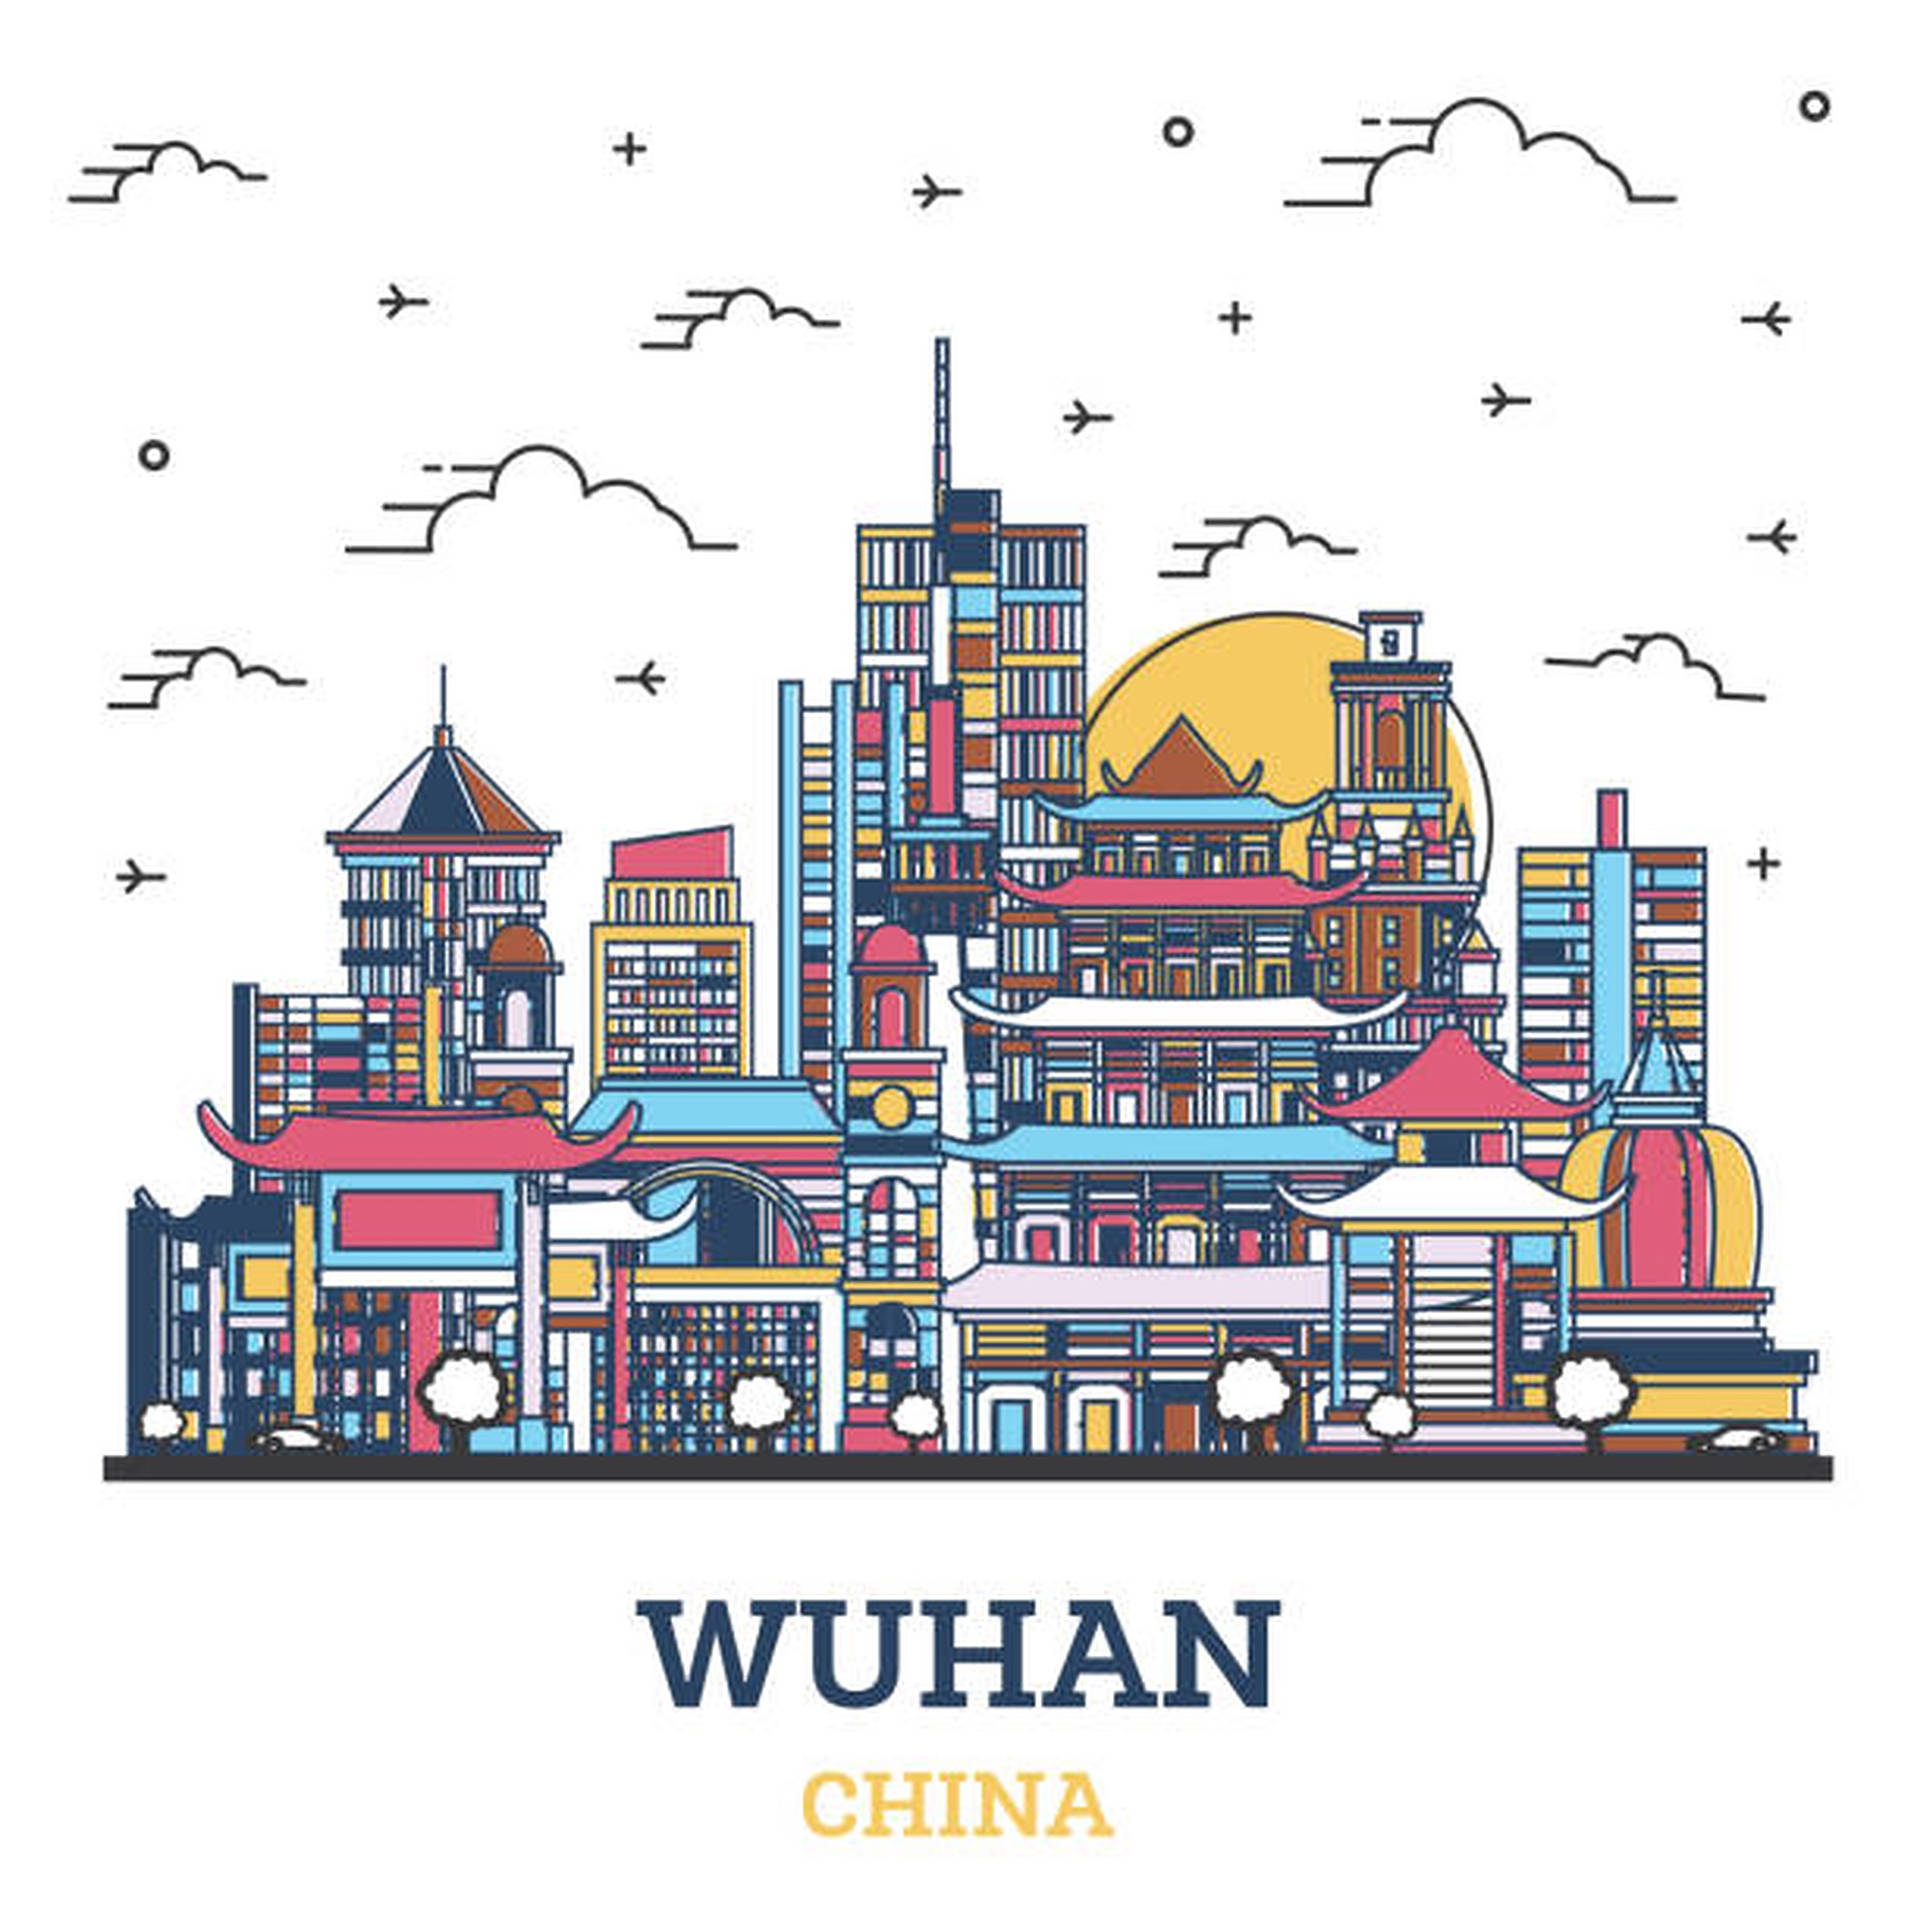 Colorful Art City Of Wuhan Wallpaper